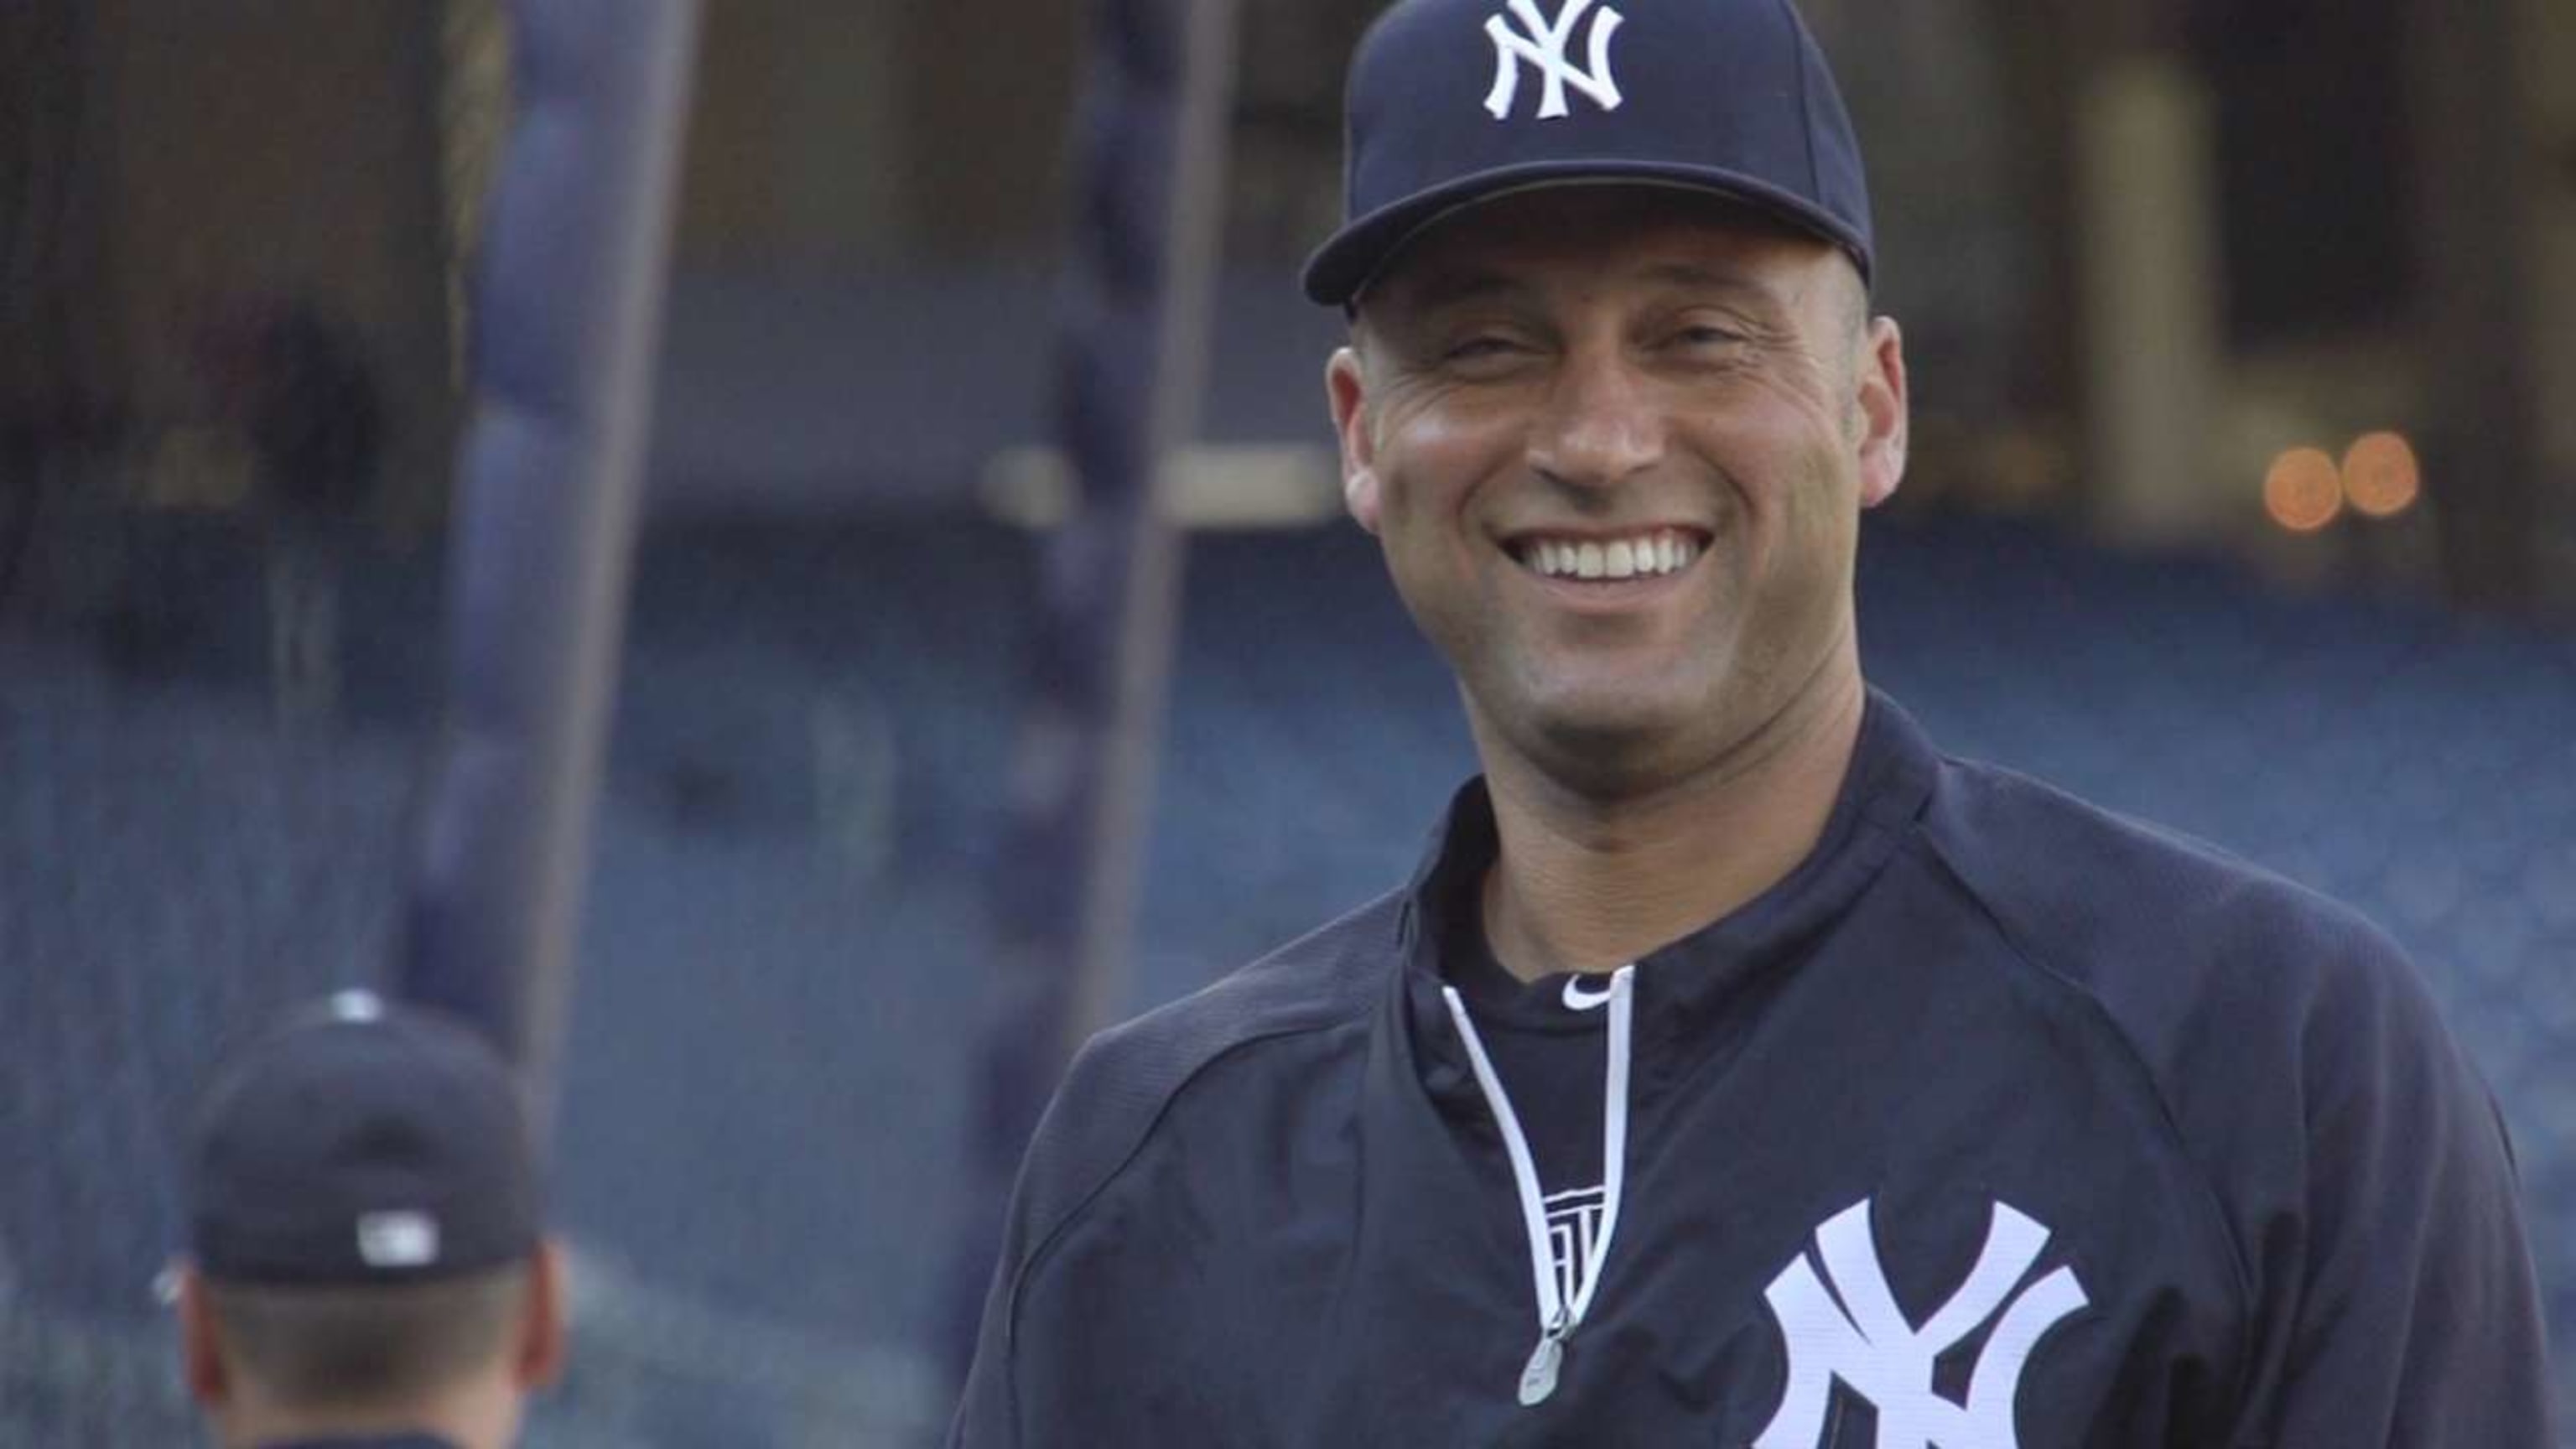 Yankees eyeing 2009 World Champion for assistant hitting coach job